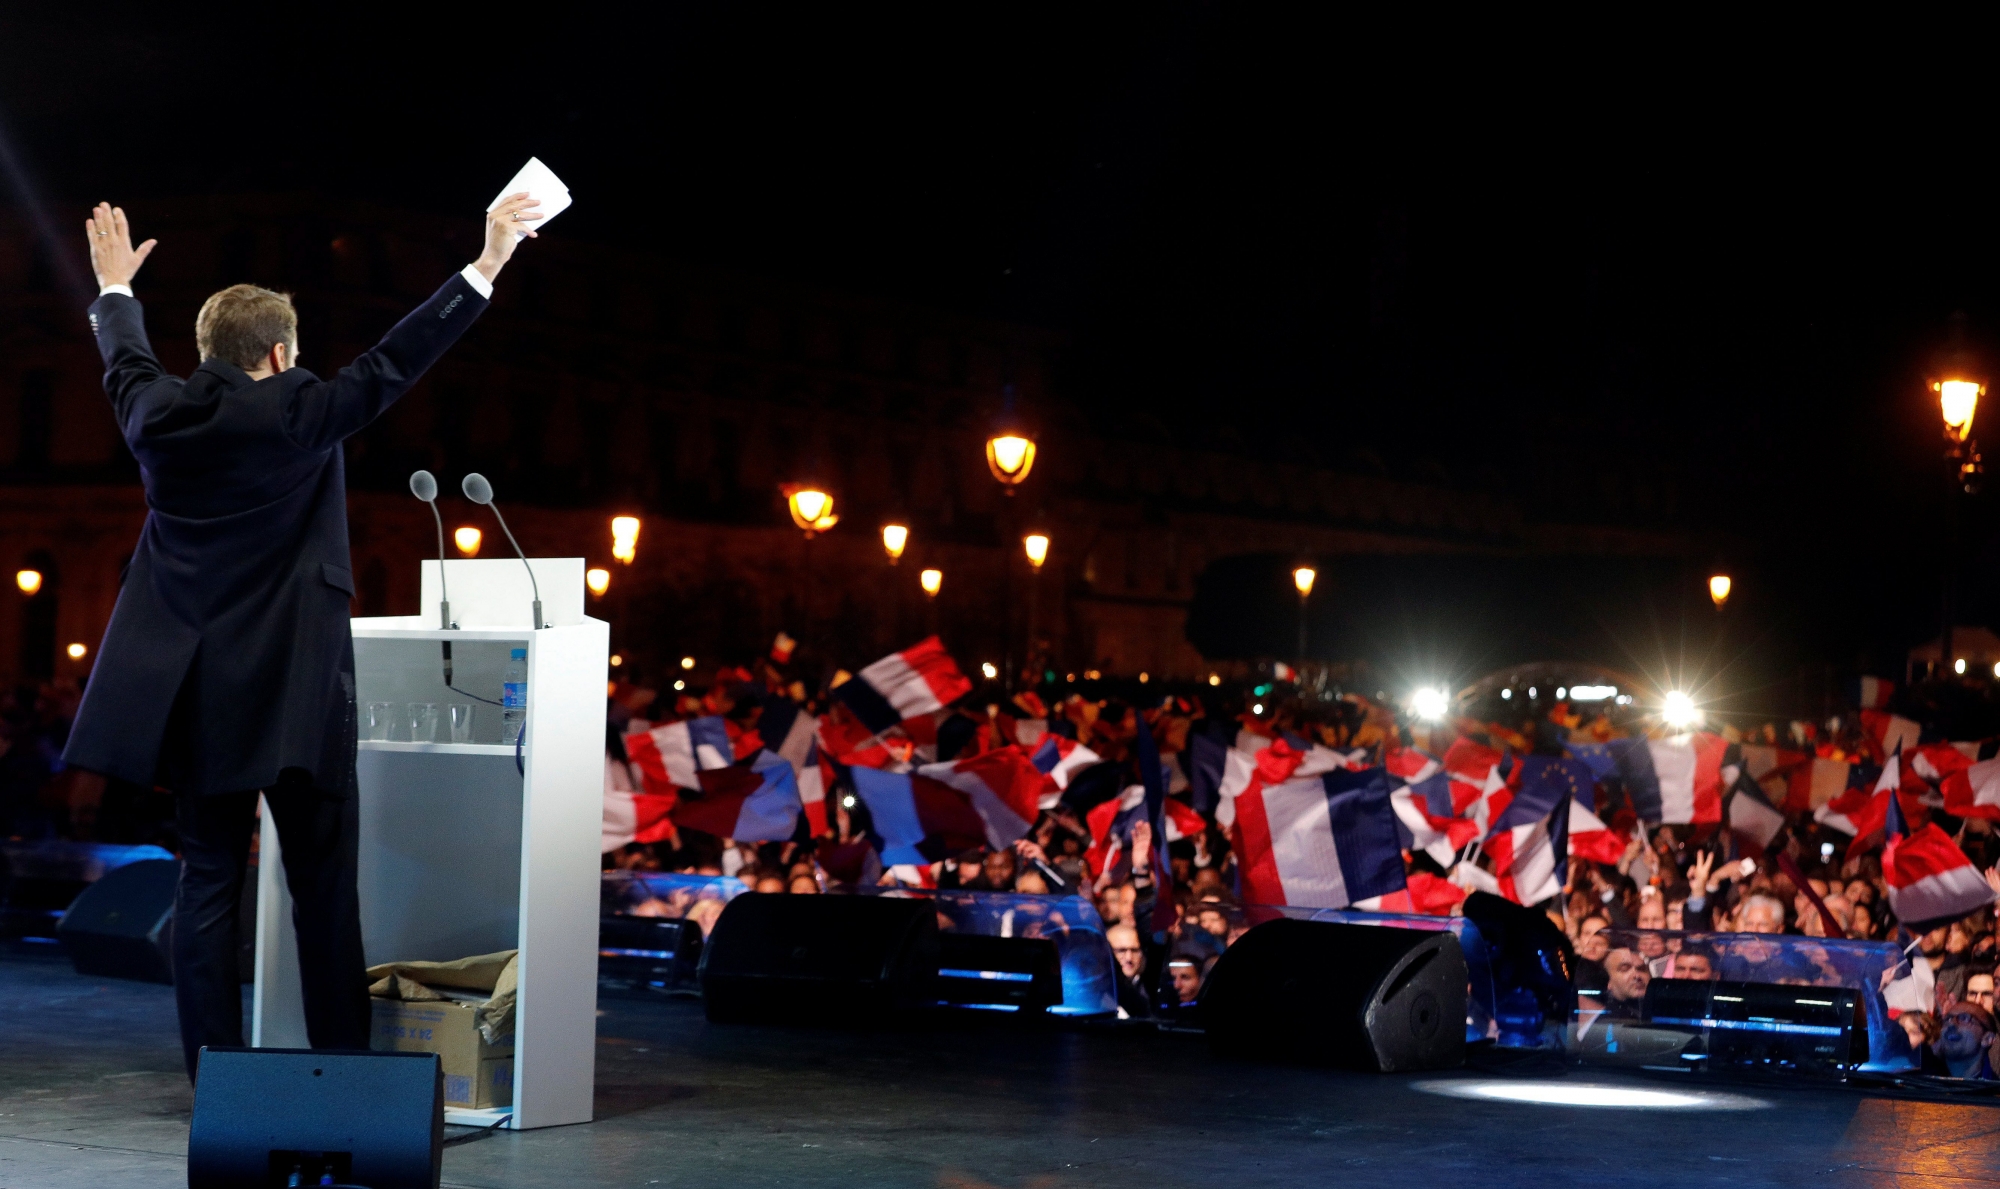 epa05949581 French President-elect Emmanuel Macron celebrates on the stage at his victory rally near the Louvre in Paris, France, 07 May 2017. Emmanuel Macron was elected French president on 07 May 2017 in a resounding victory over far-right Front National (FN - National Front) rival after a deeply divisive campaign, initial estimates showed.  EPA/PHILIPPE WOJAZER / POOL MAXPPP OUT FRANCE PRESIDENTIAL ELECTIONS